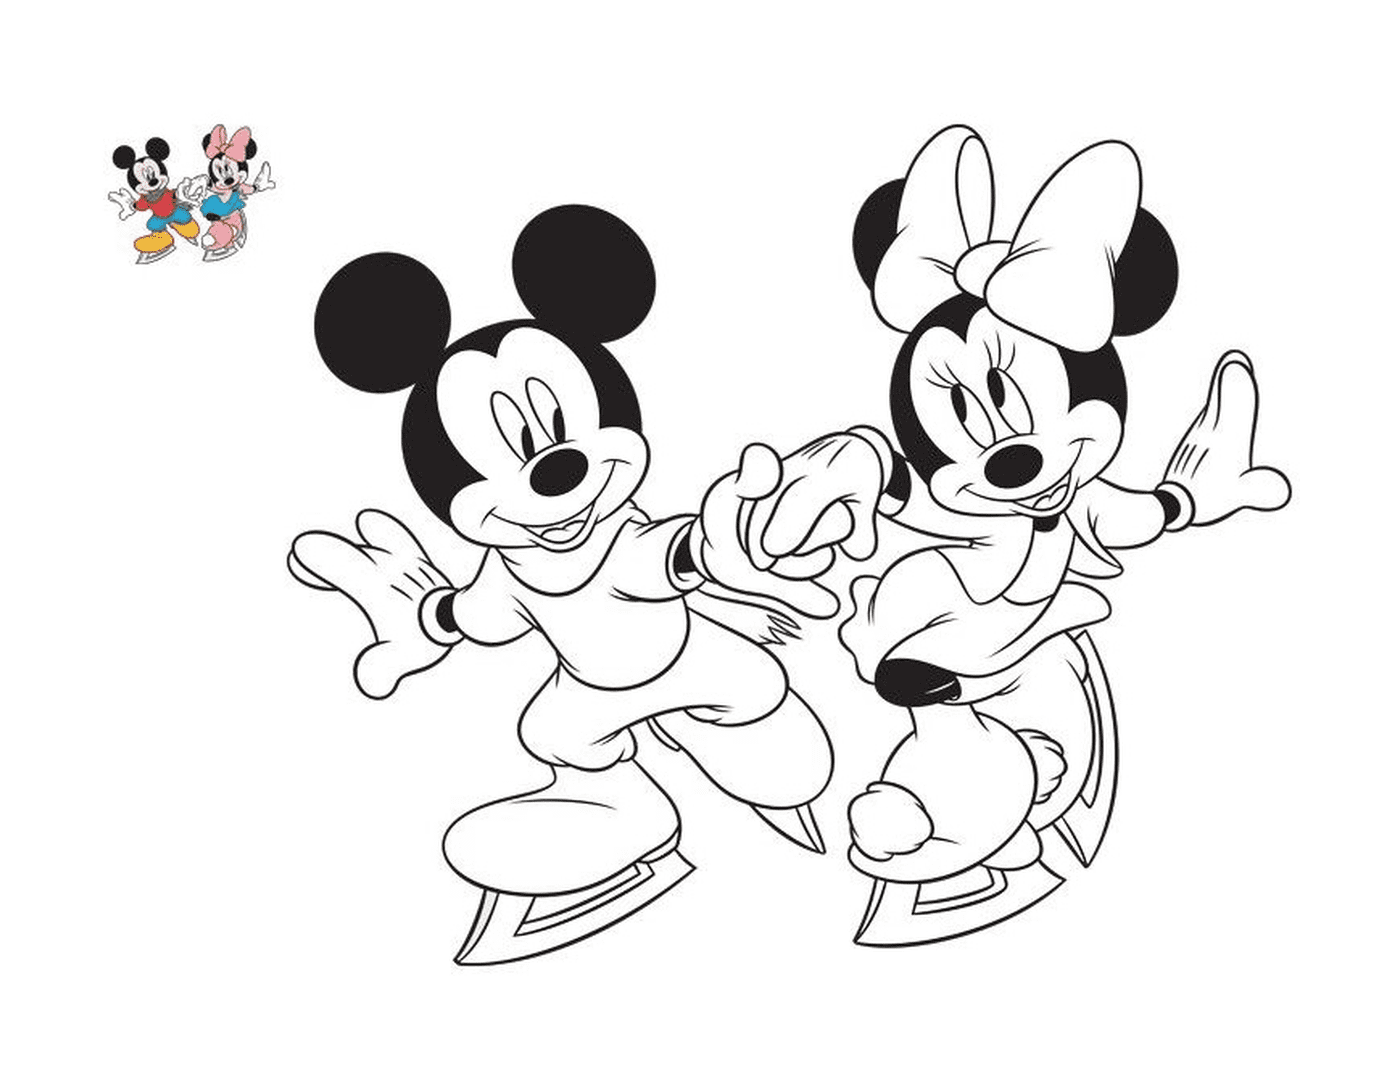  Mickey and Minnie in skates 